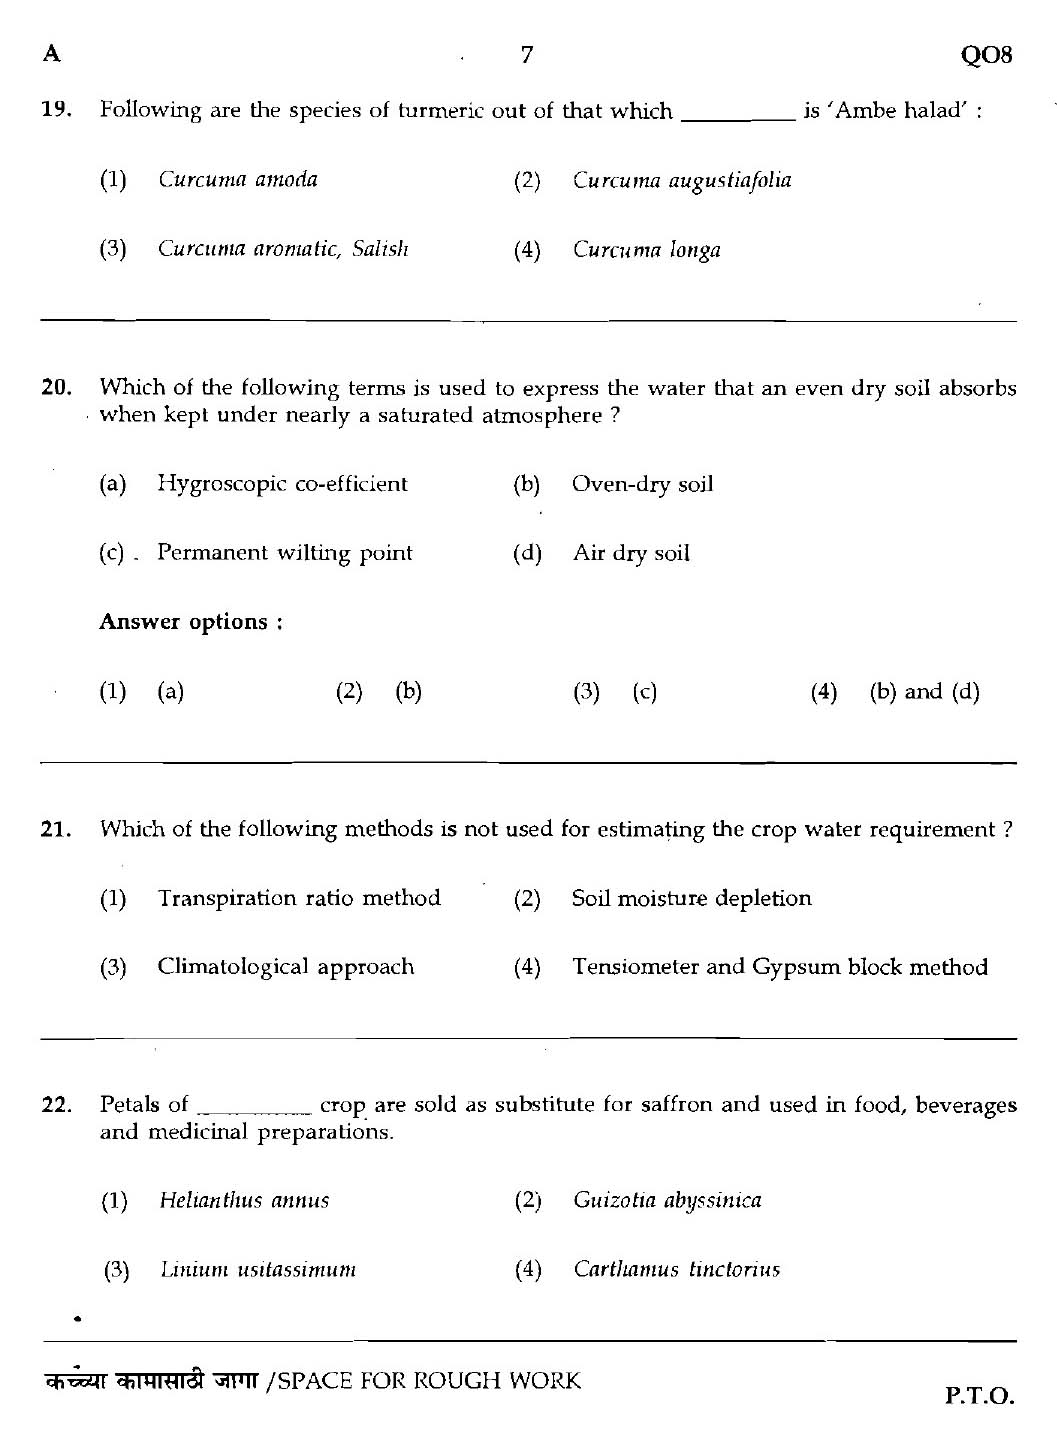 MPSC Agricultural Services Main Exam 2016 Question Paper 1 Agricultural Science 6